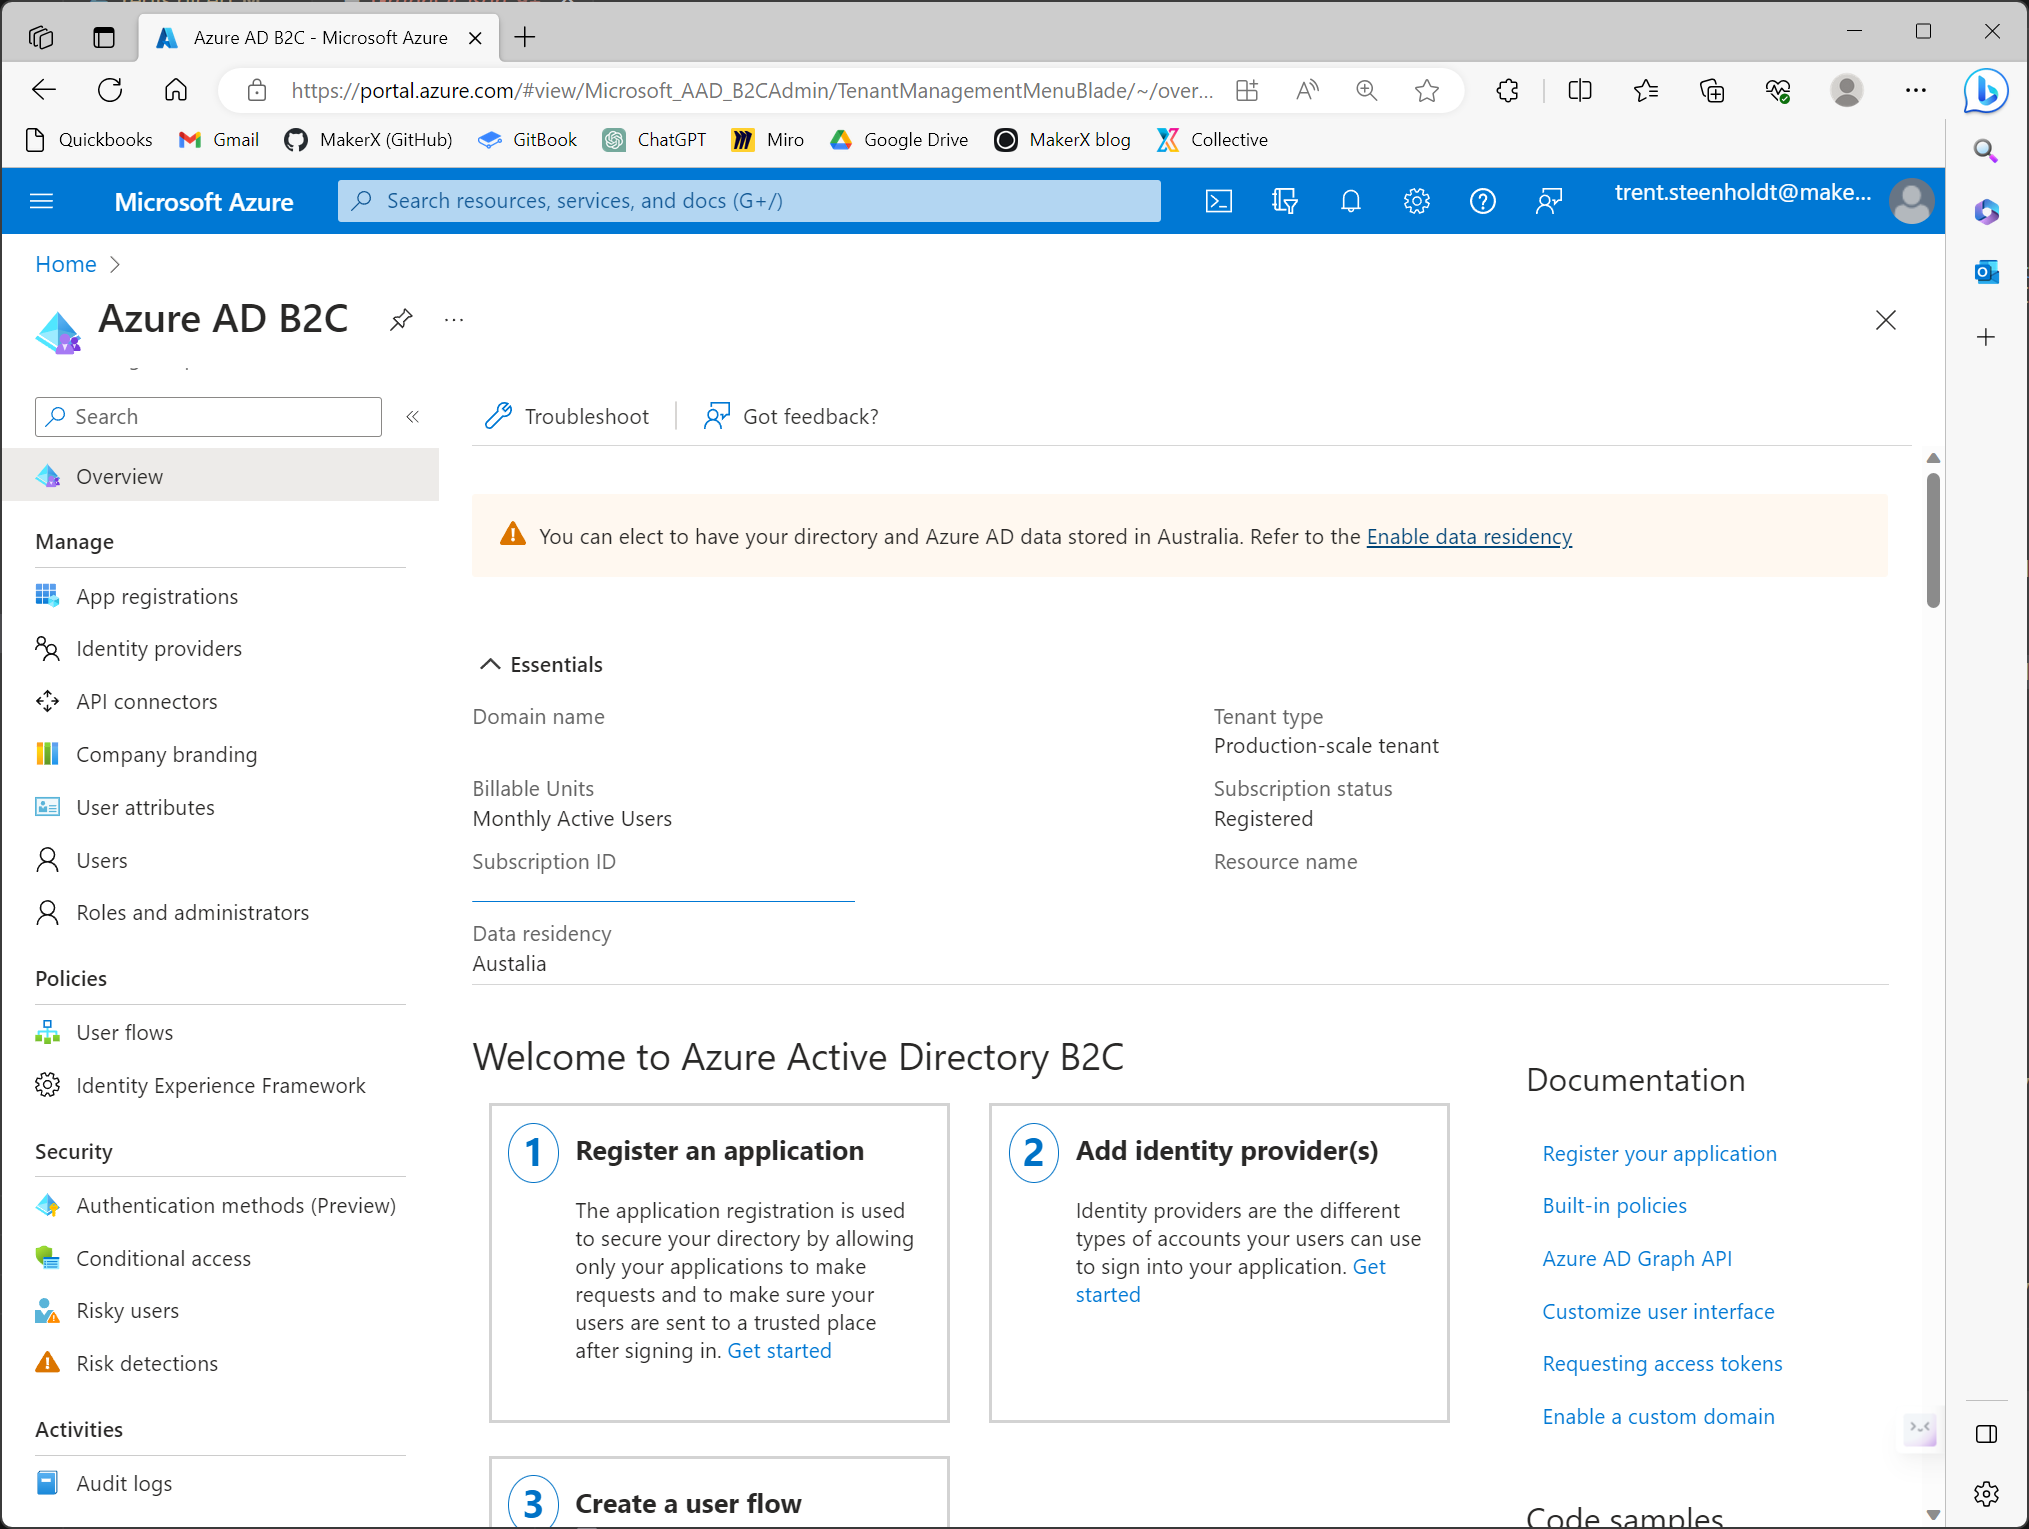 Automating Azure AD B2C tenancy deployments for your app